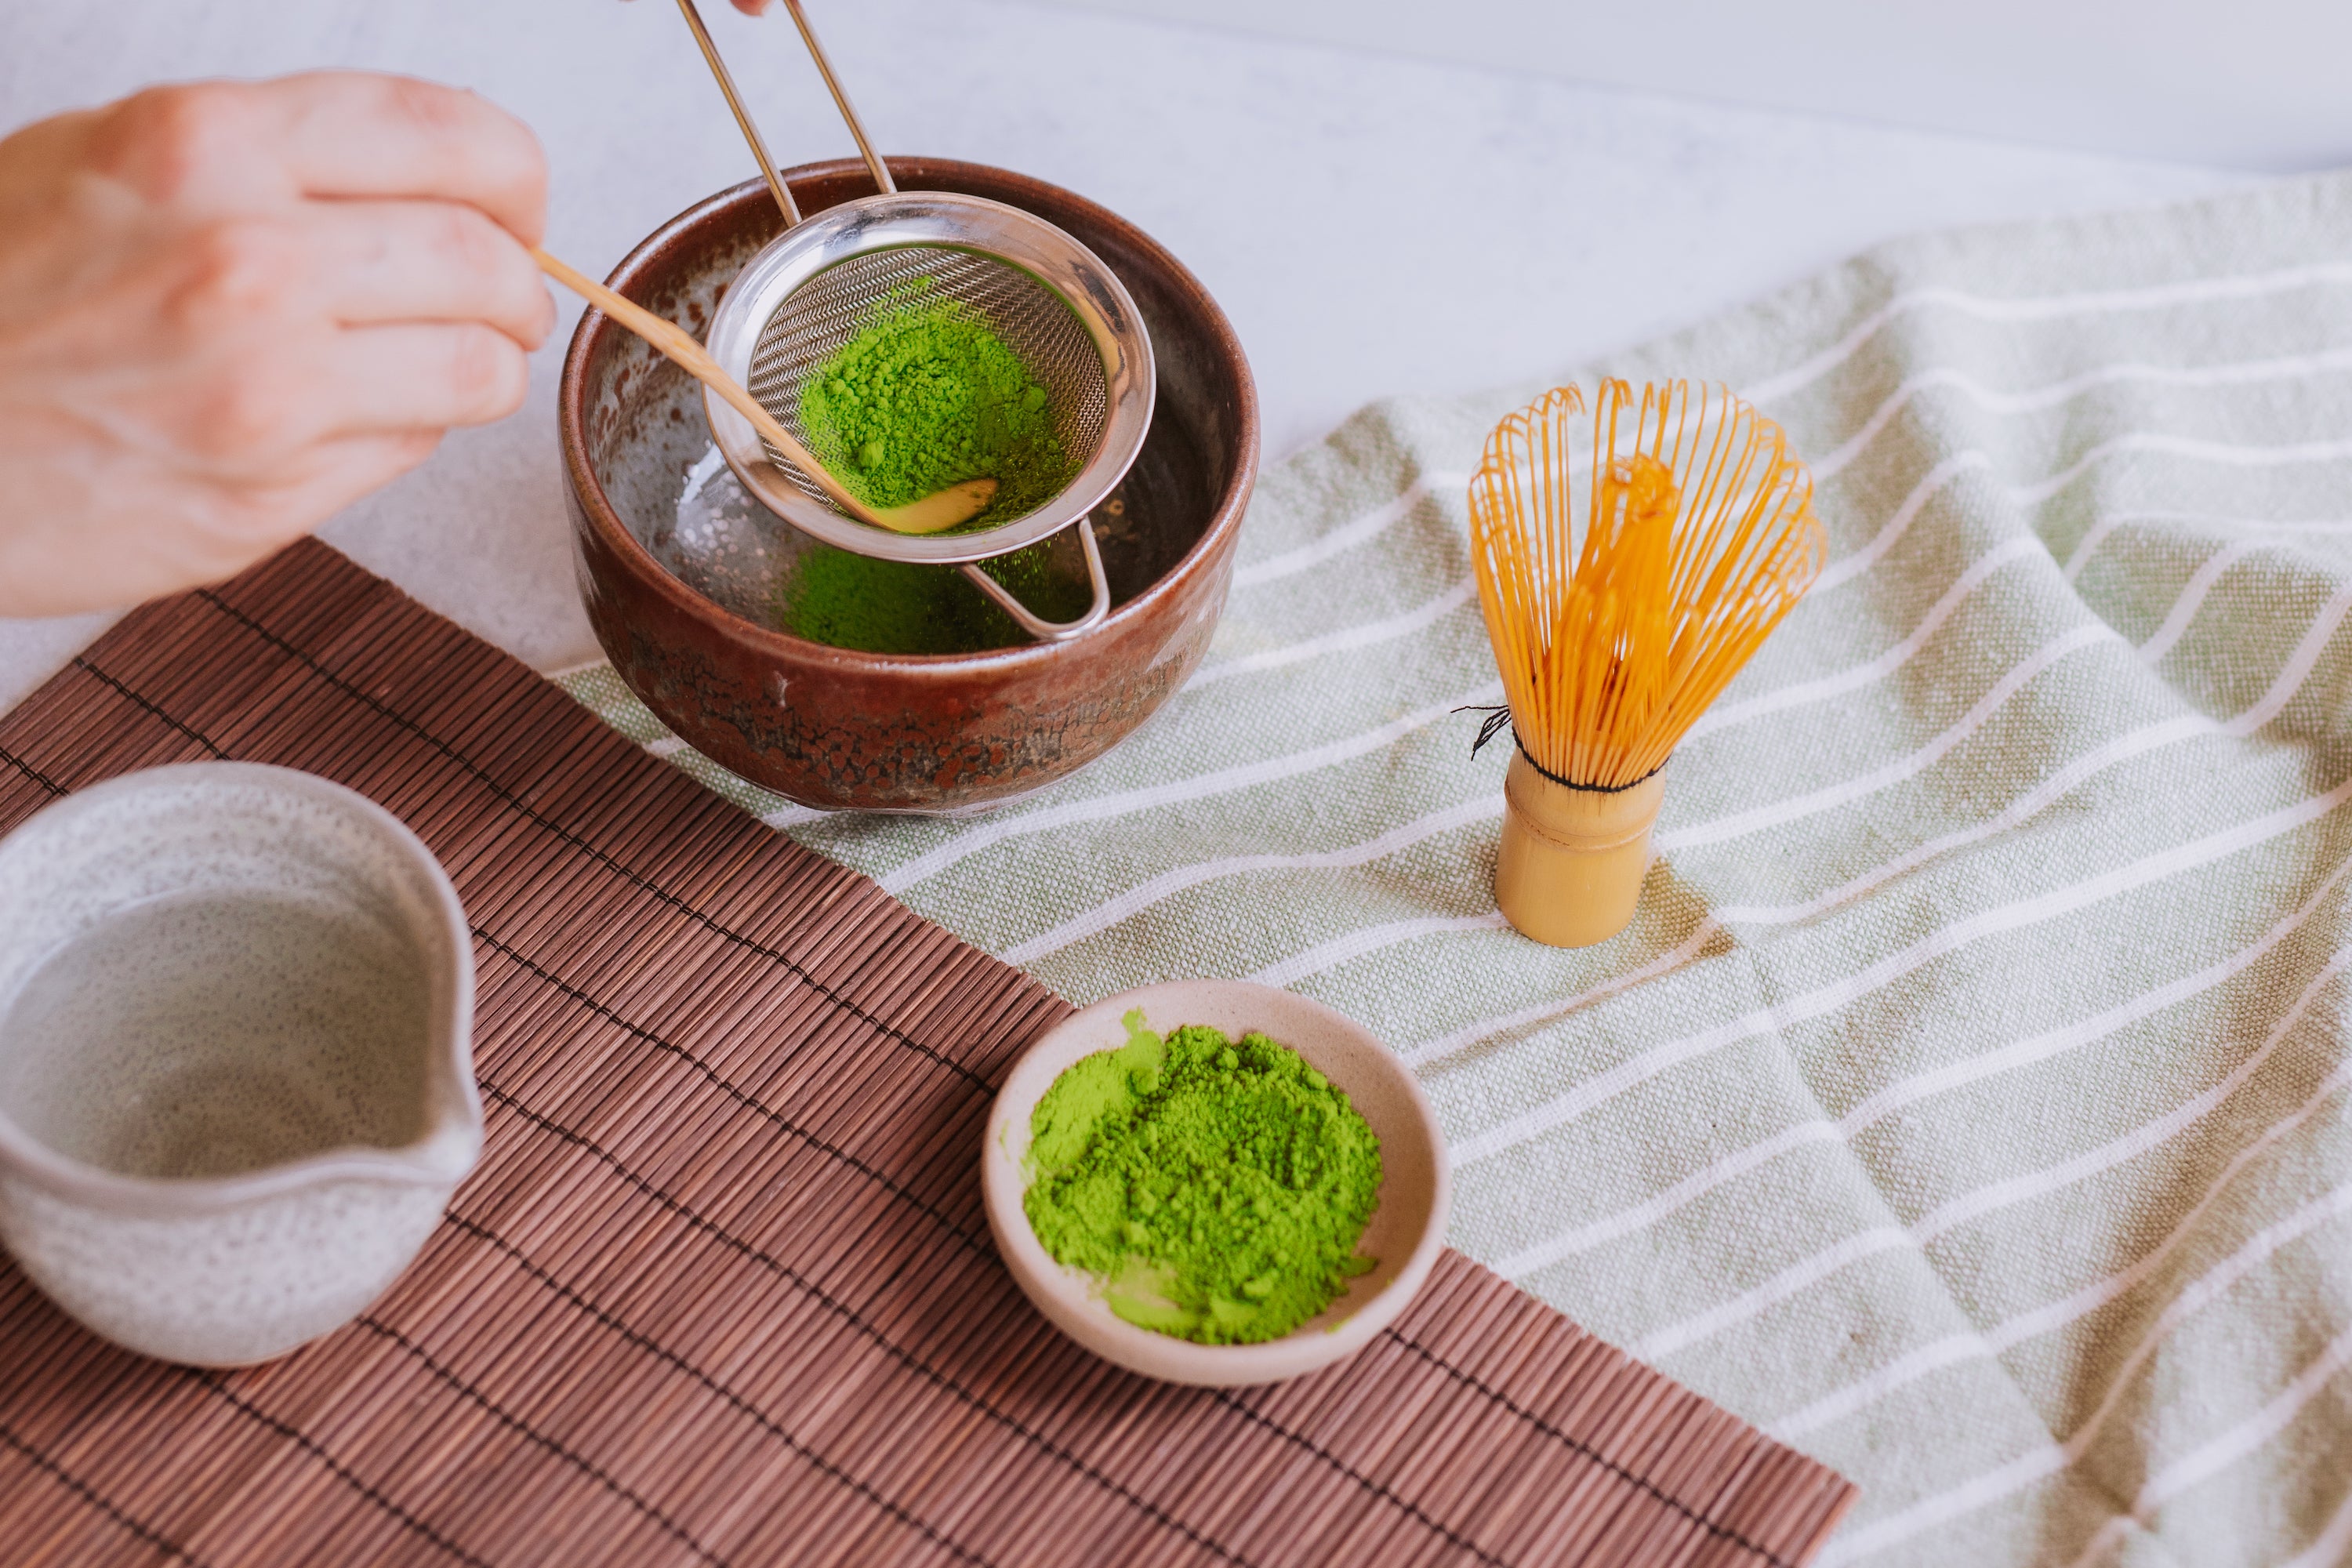 hand sifting matcha through a sieve into a matcha chawan with whisk, pitcher, and dish of matcha powder